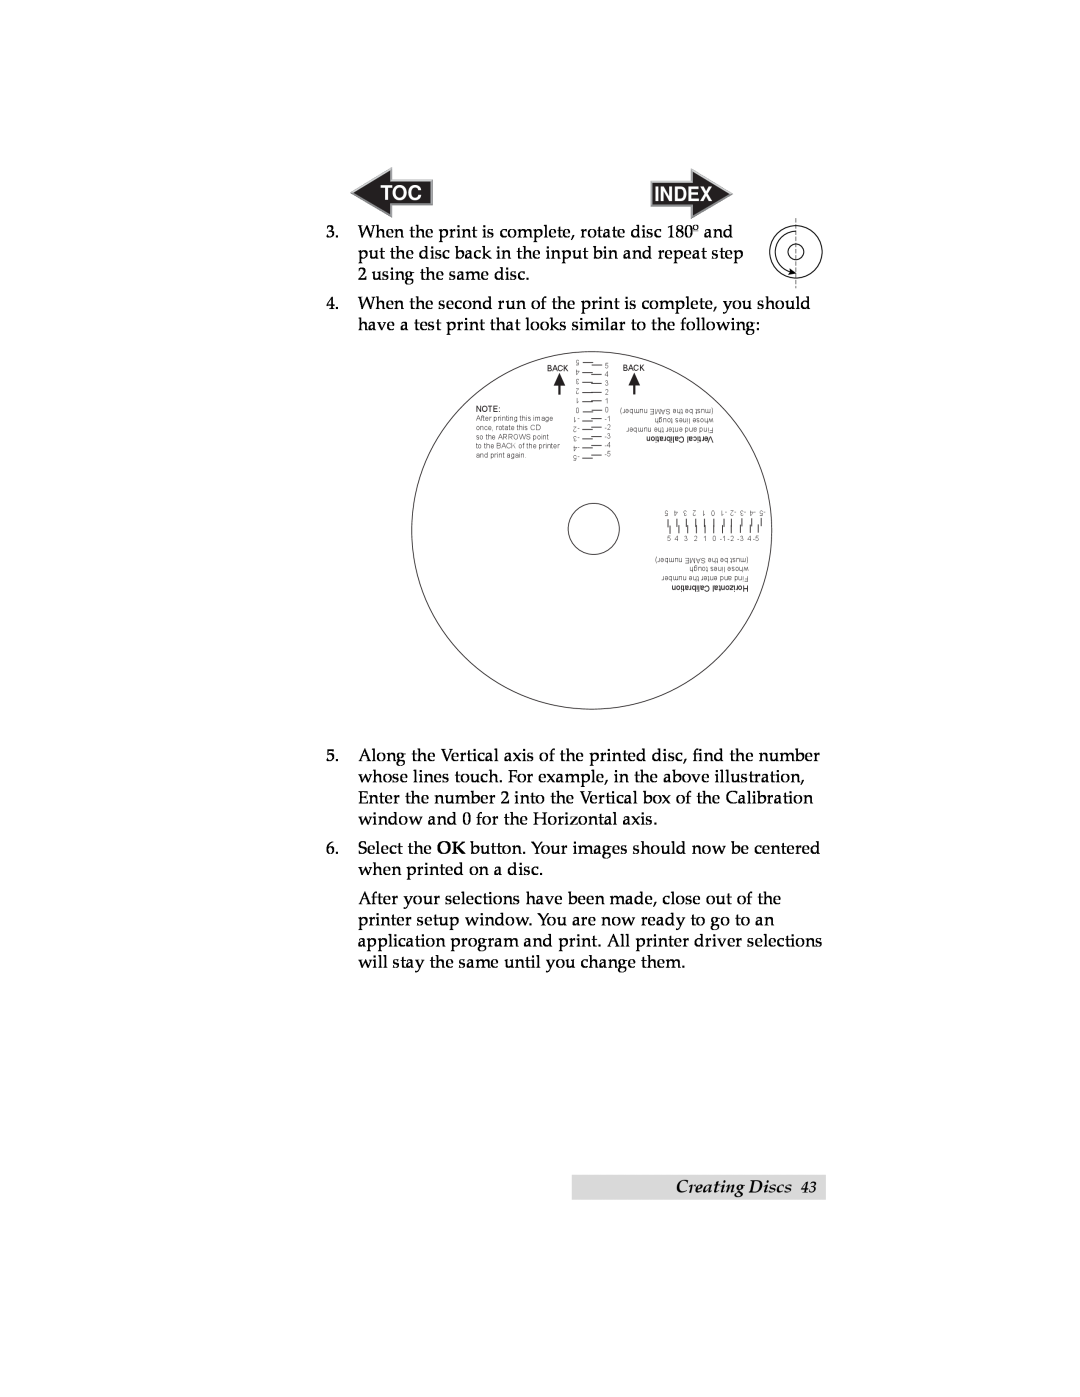 Primera Technology 032910-511262 user manual Index, When the print is complete, rotate disc 180º and, Creating Discs 